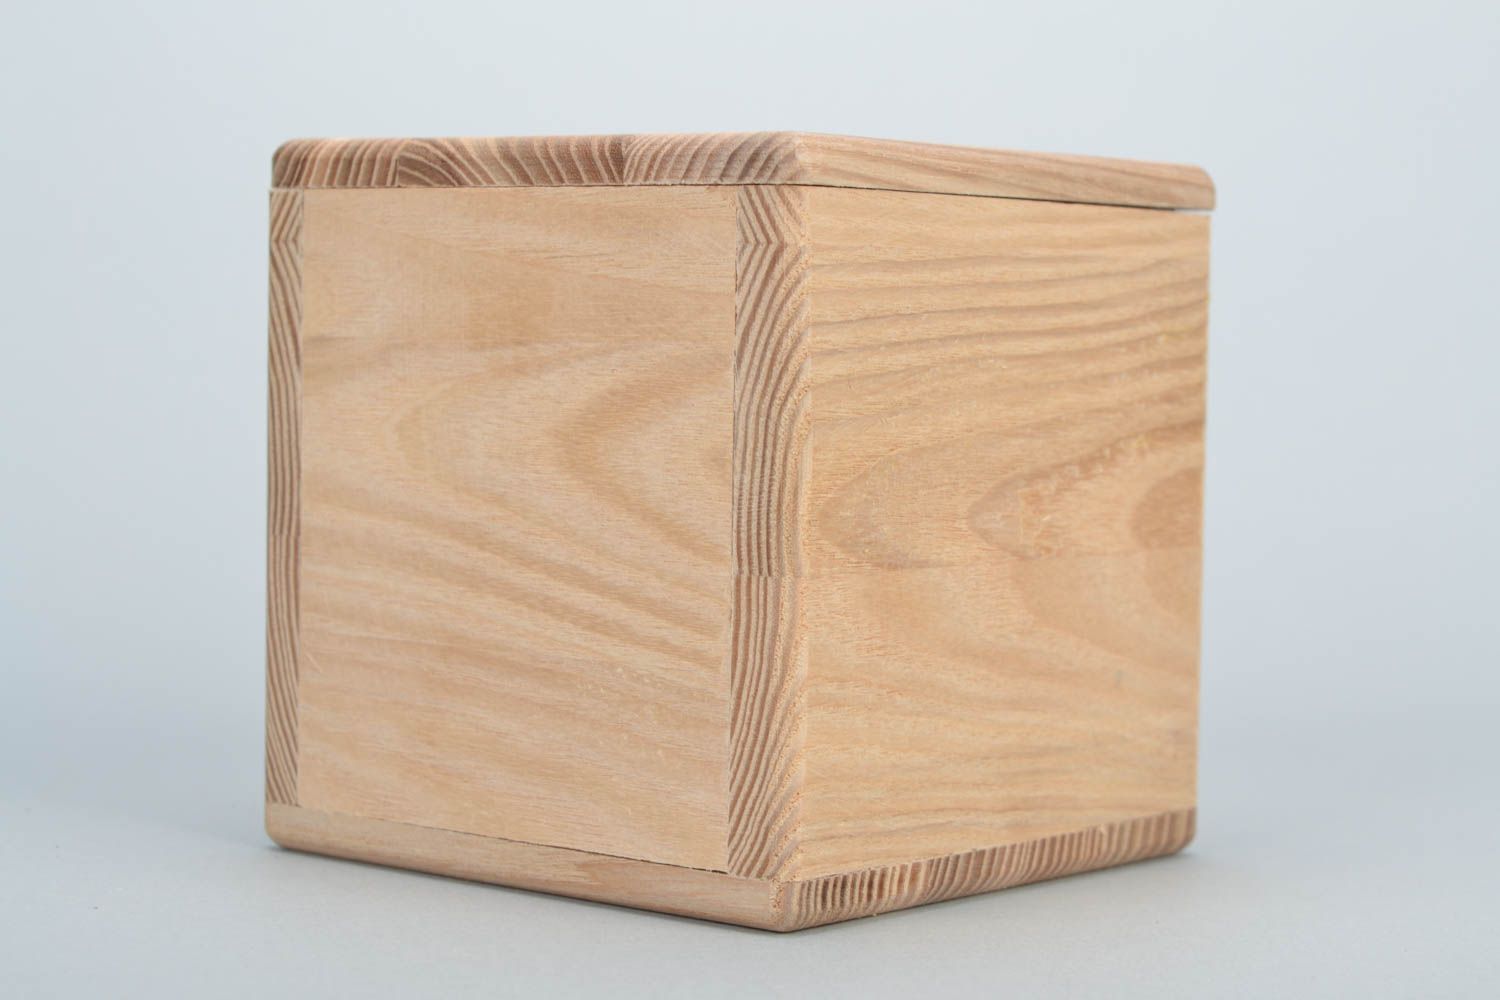 Handmade natural wooden square jewelry box craft blank for creative work photo 1